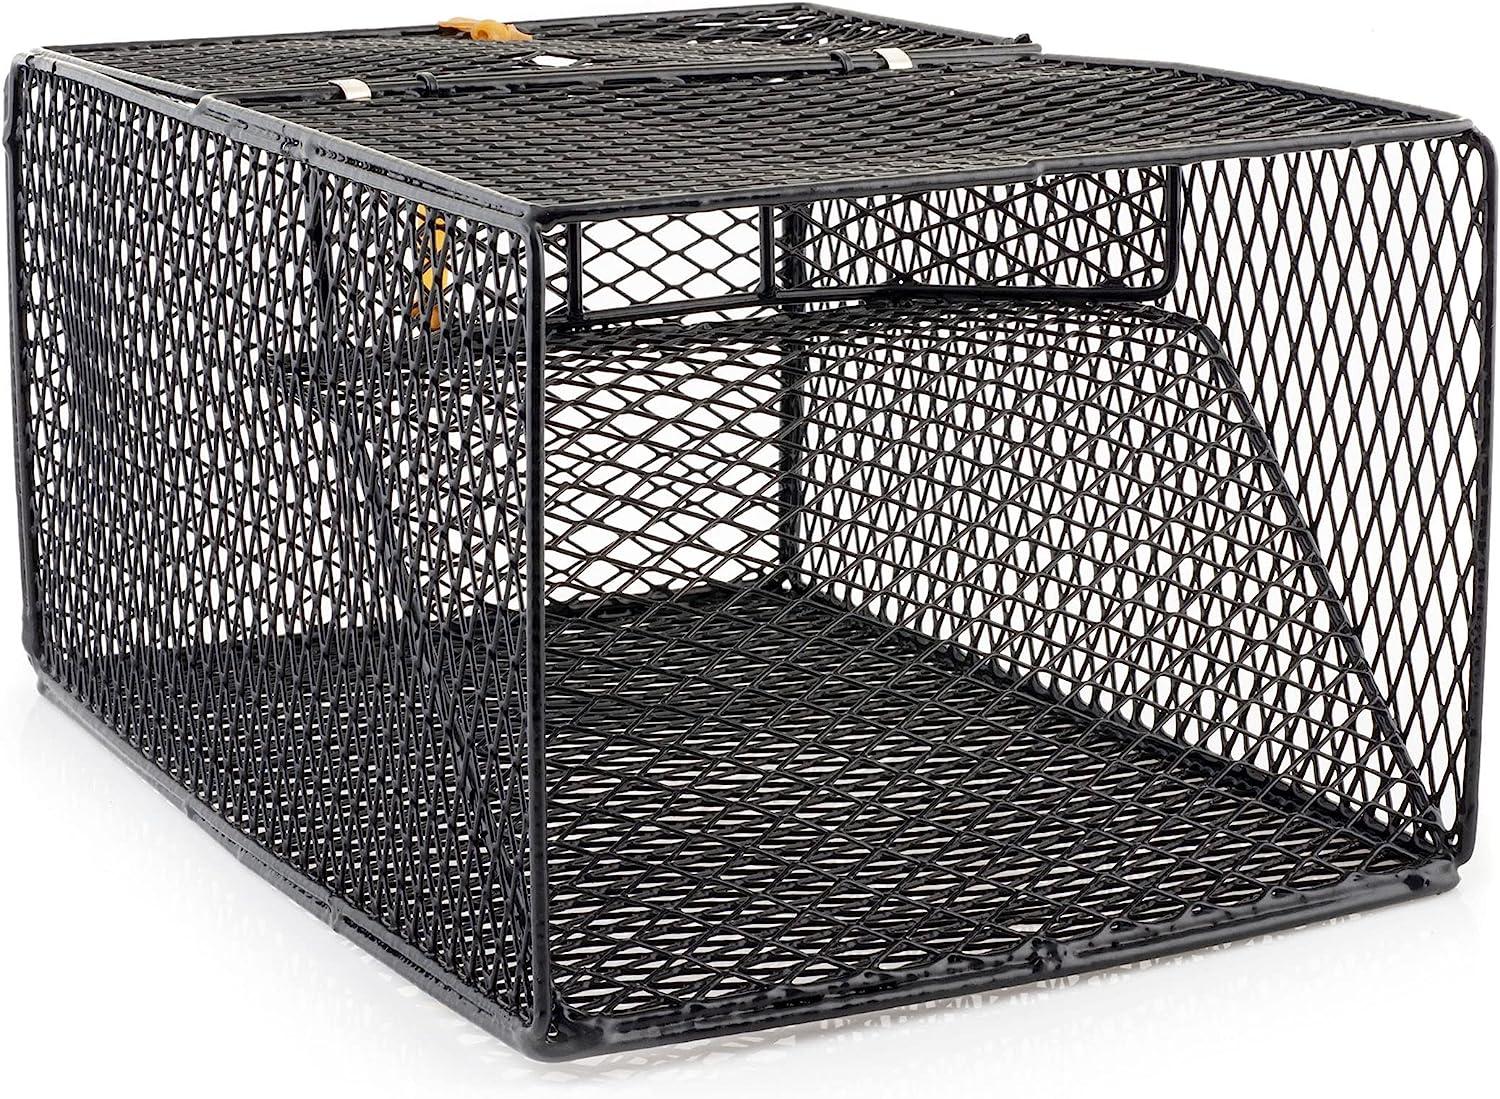 South Bend Wire Crawfish Trap - Square-Shaped, Durable Corrosion